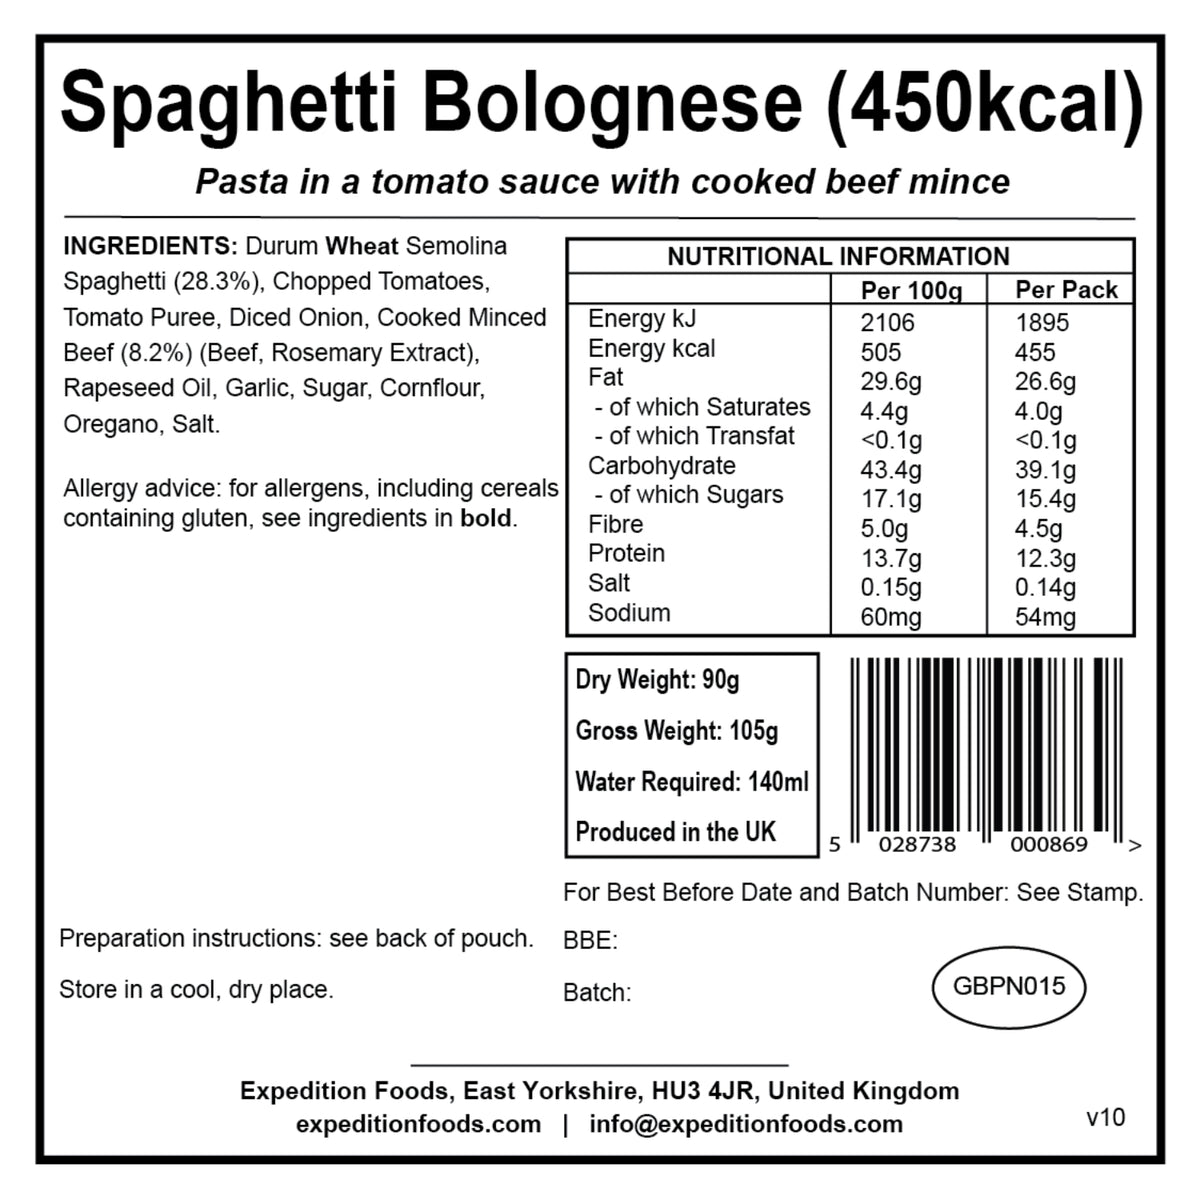 Expedition Foods Spaghetti Bolognese (450kcal)